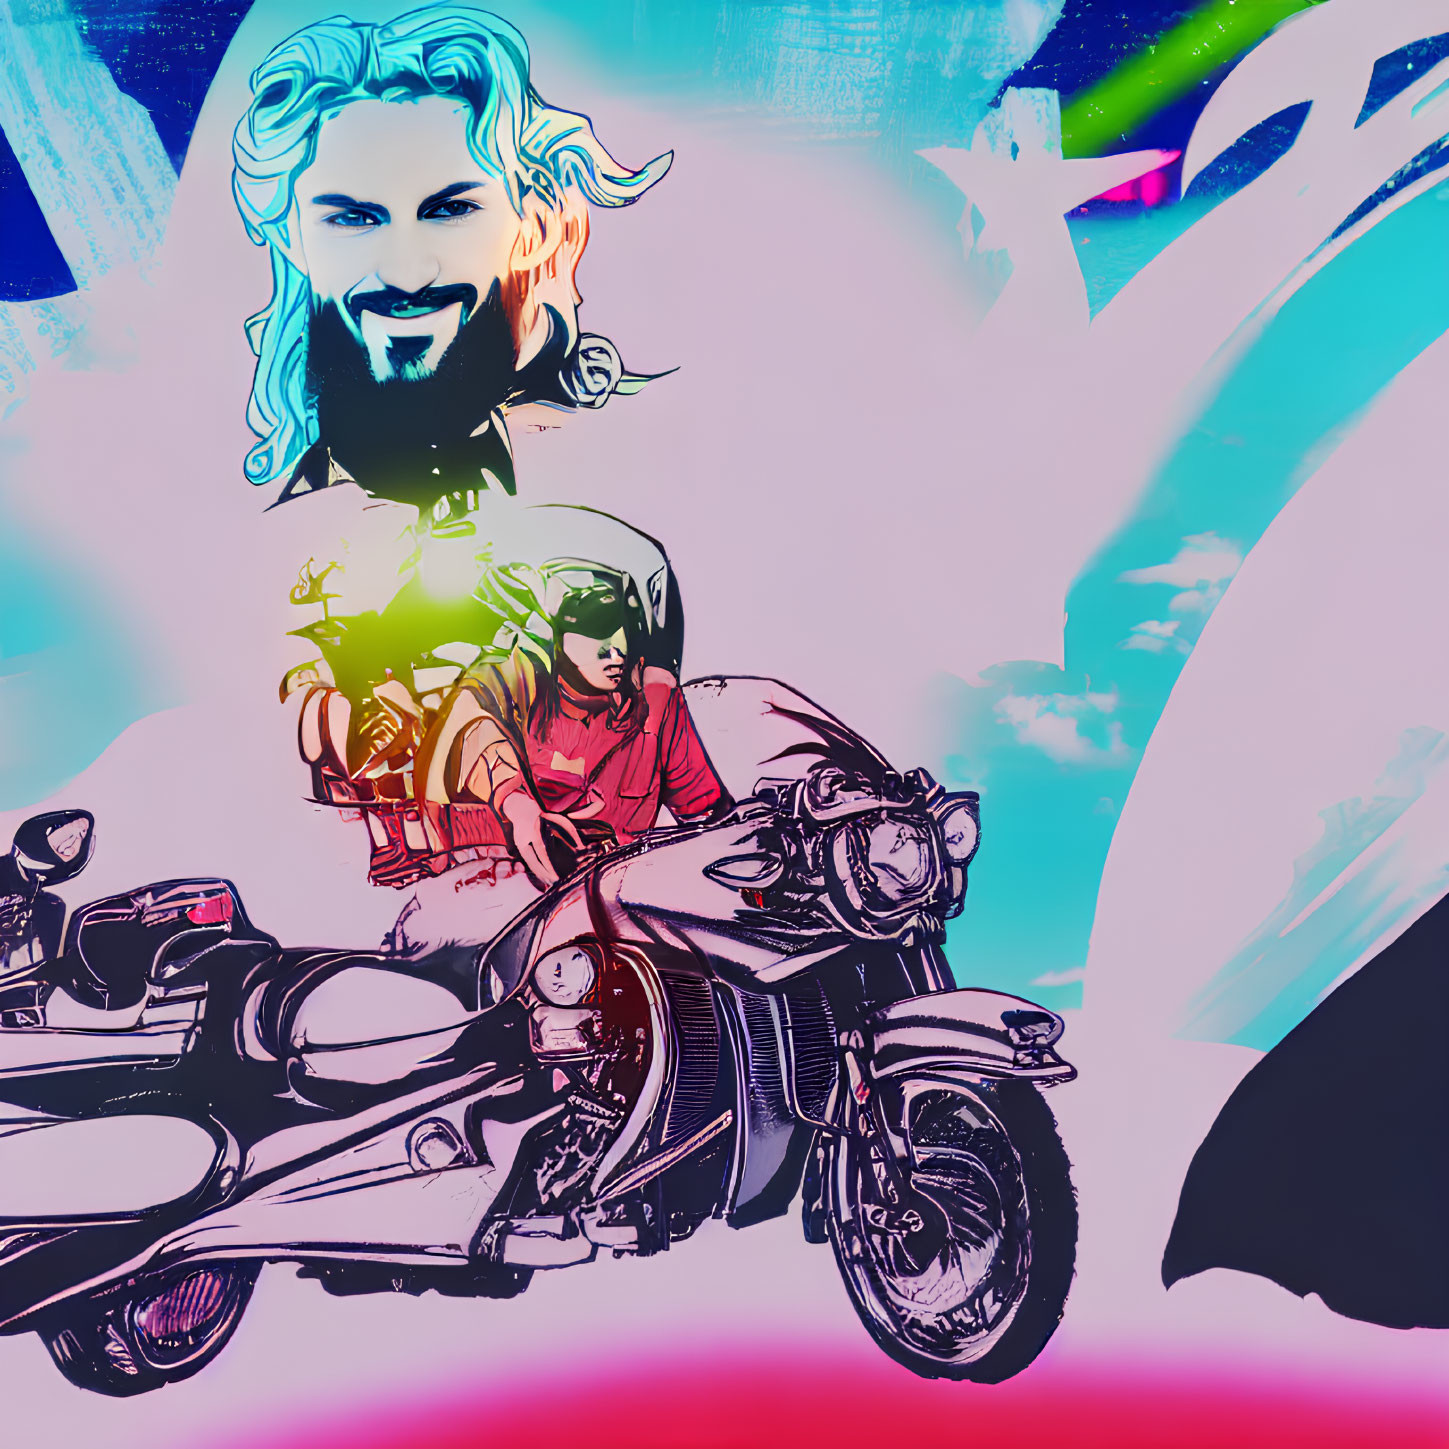 Colorful pop art image of bearded man and motorcycle